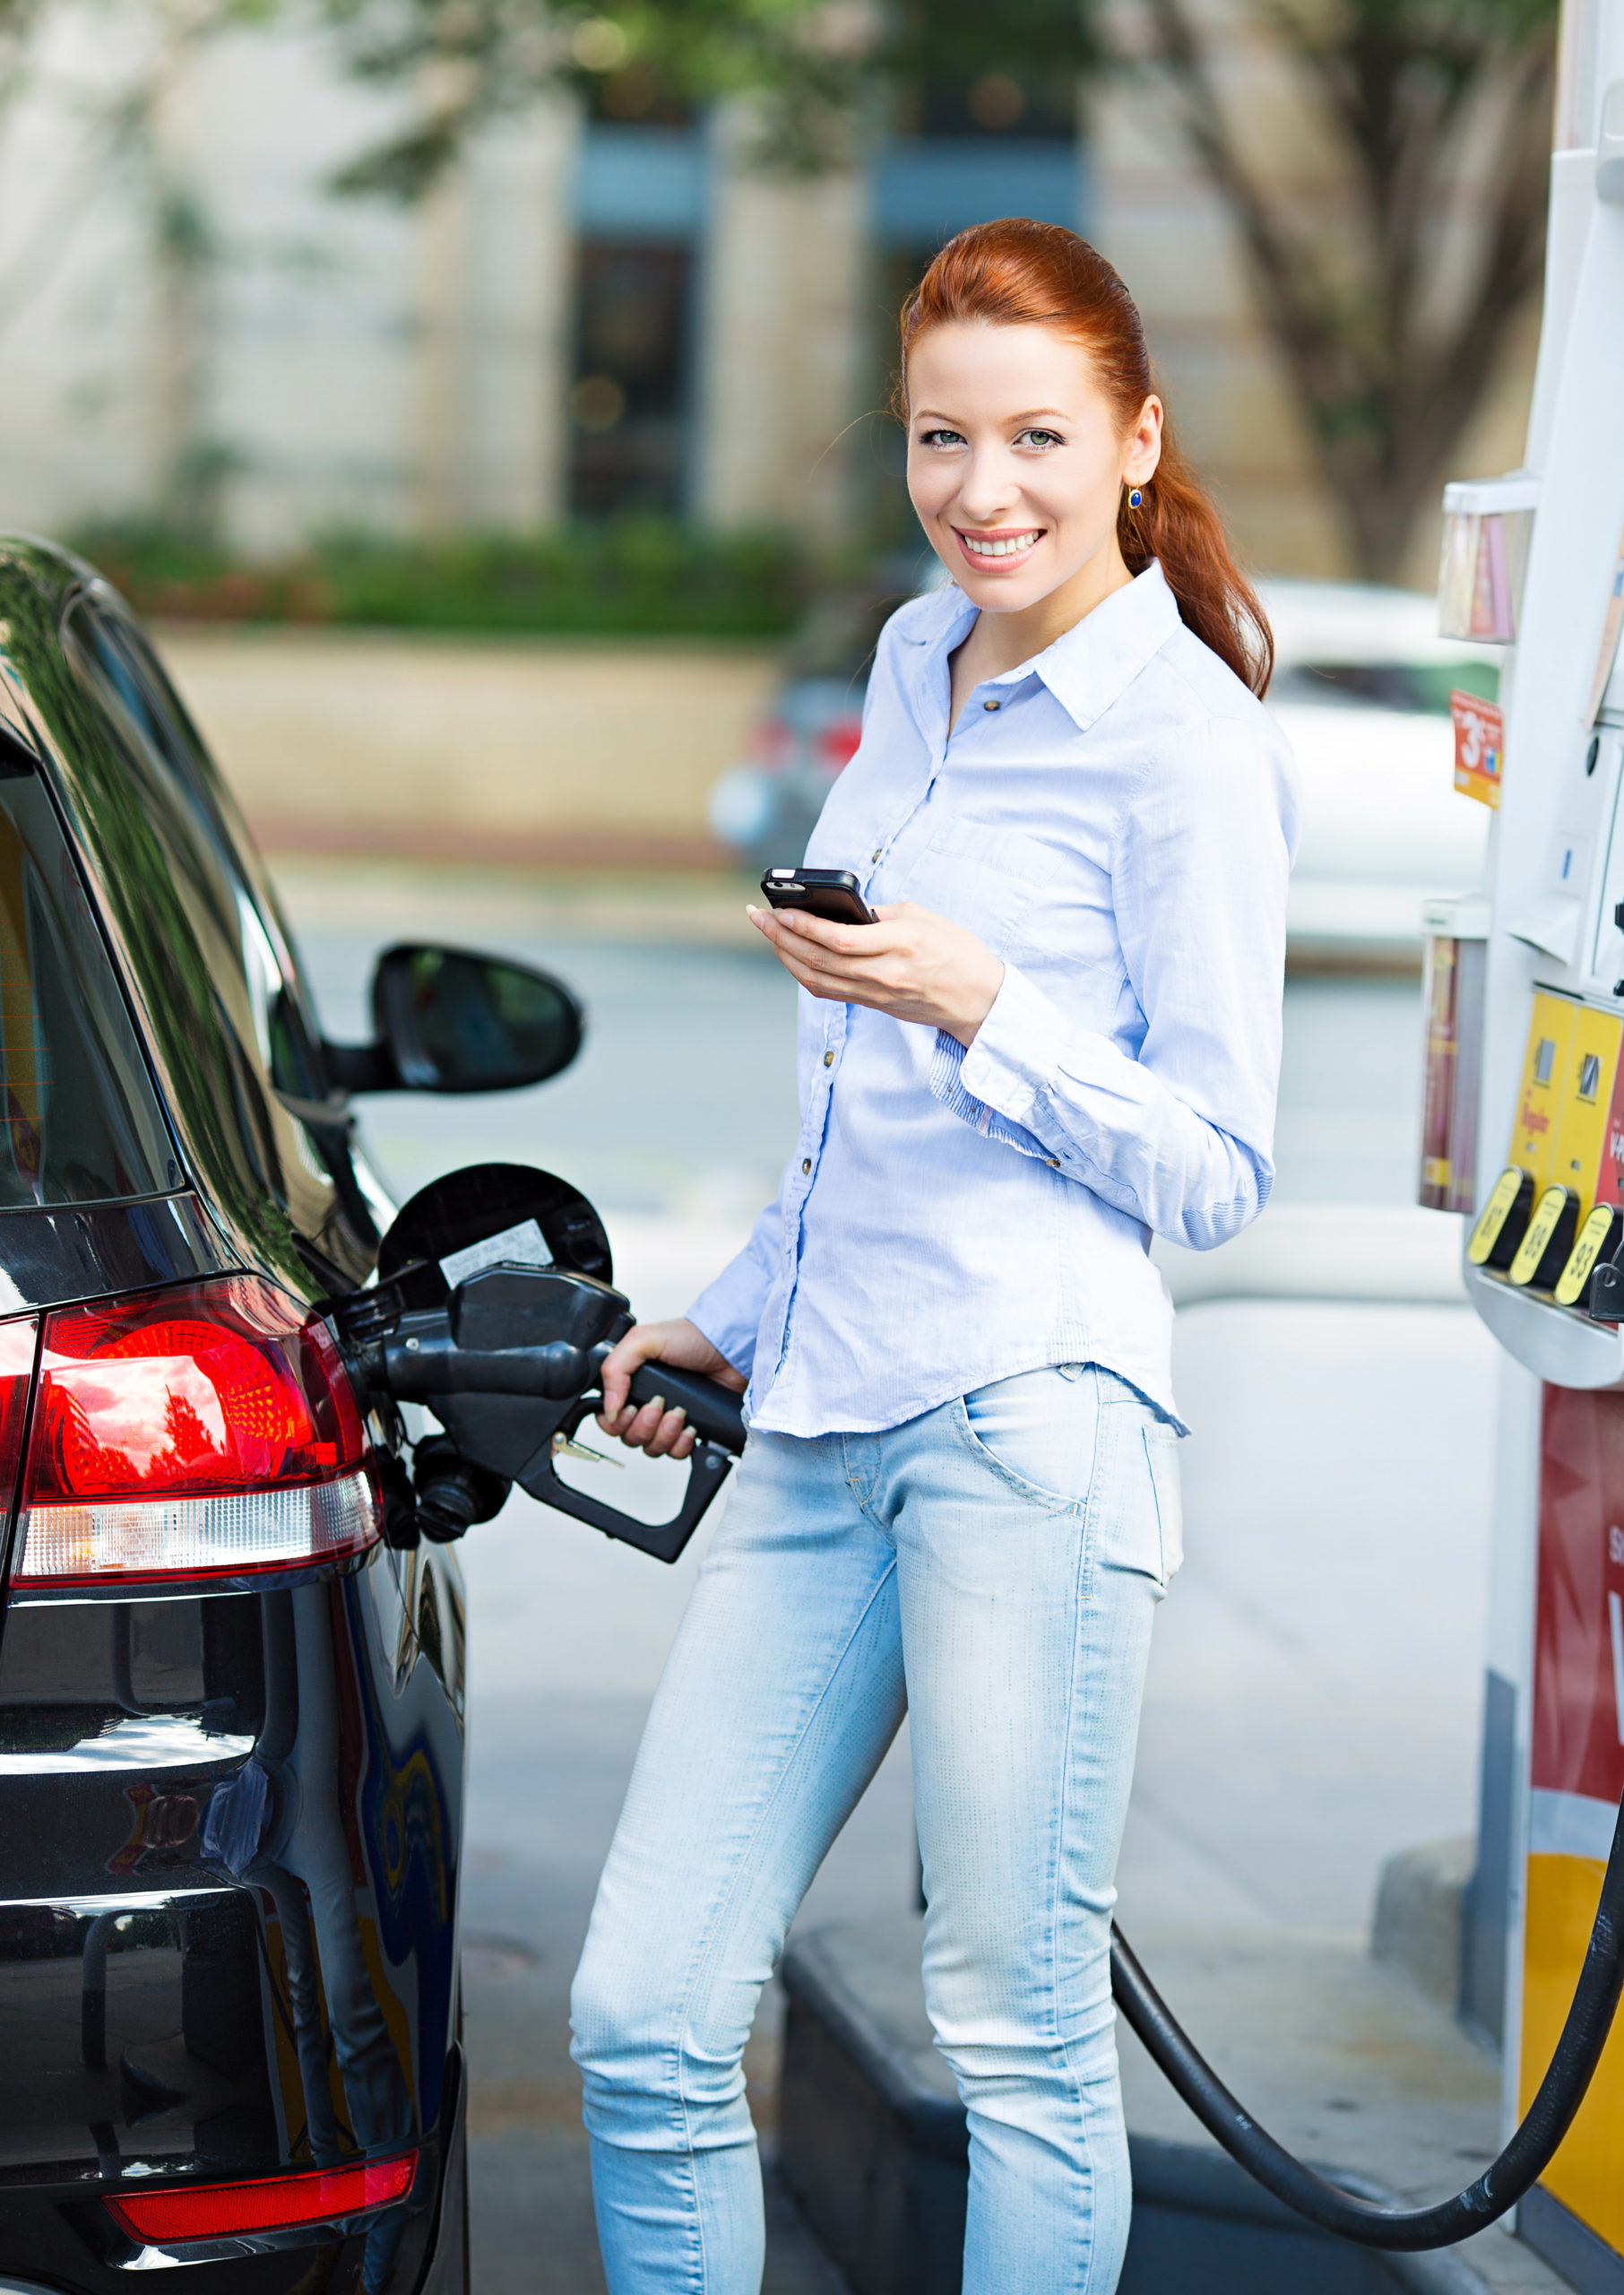 Get instant savings at the pump with our fuel rewards program at Food & Nutrition Group.